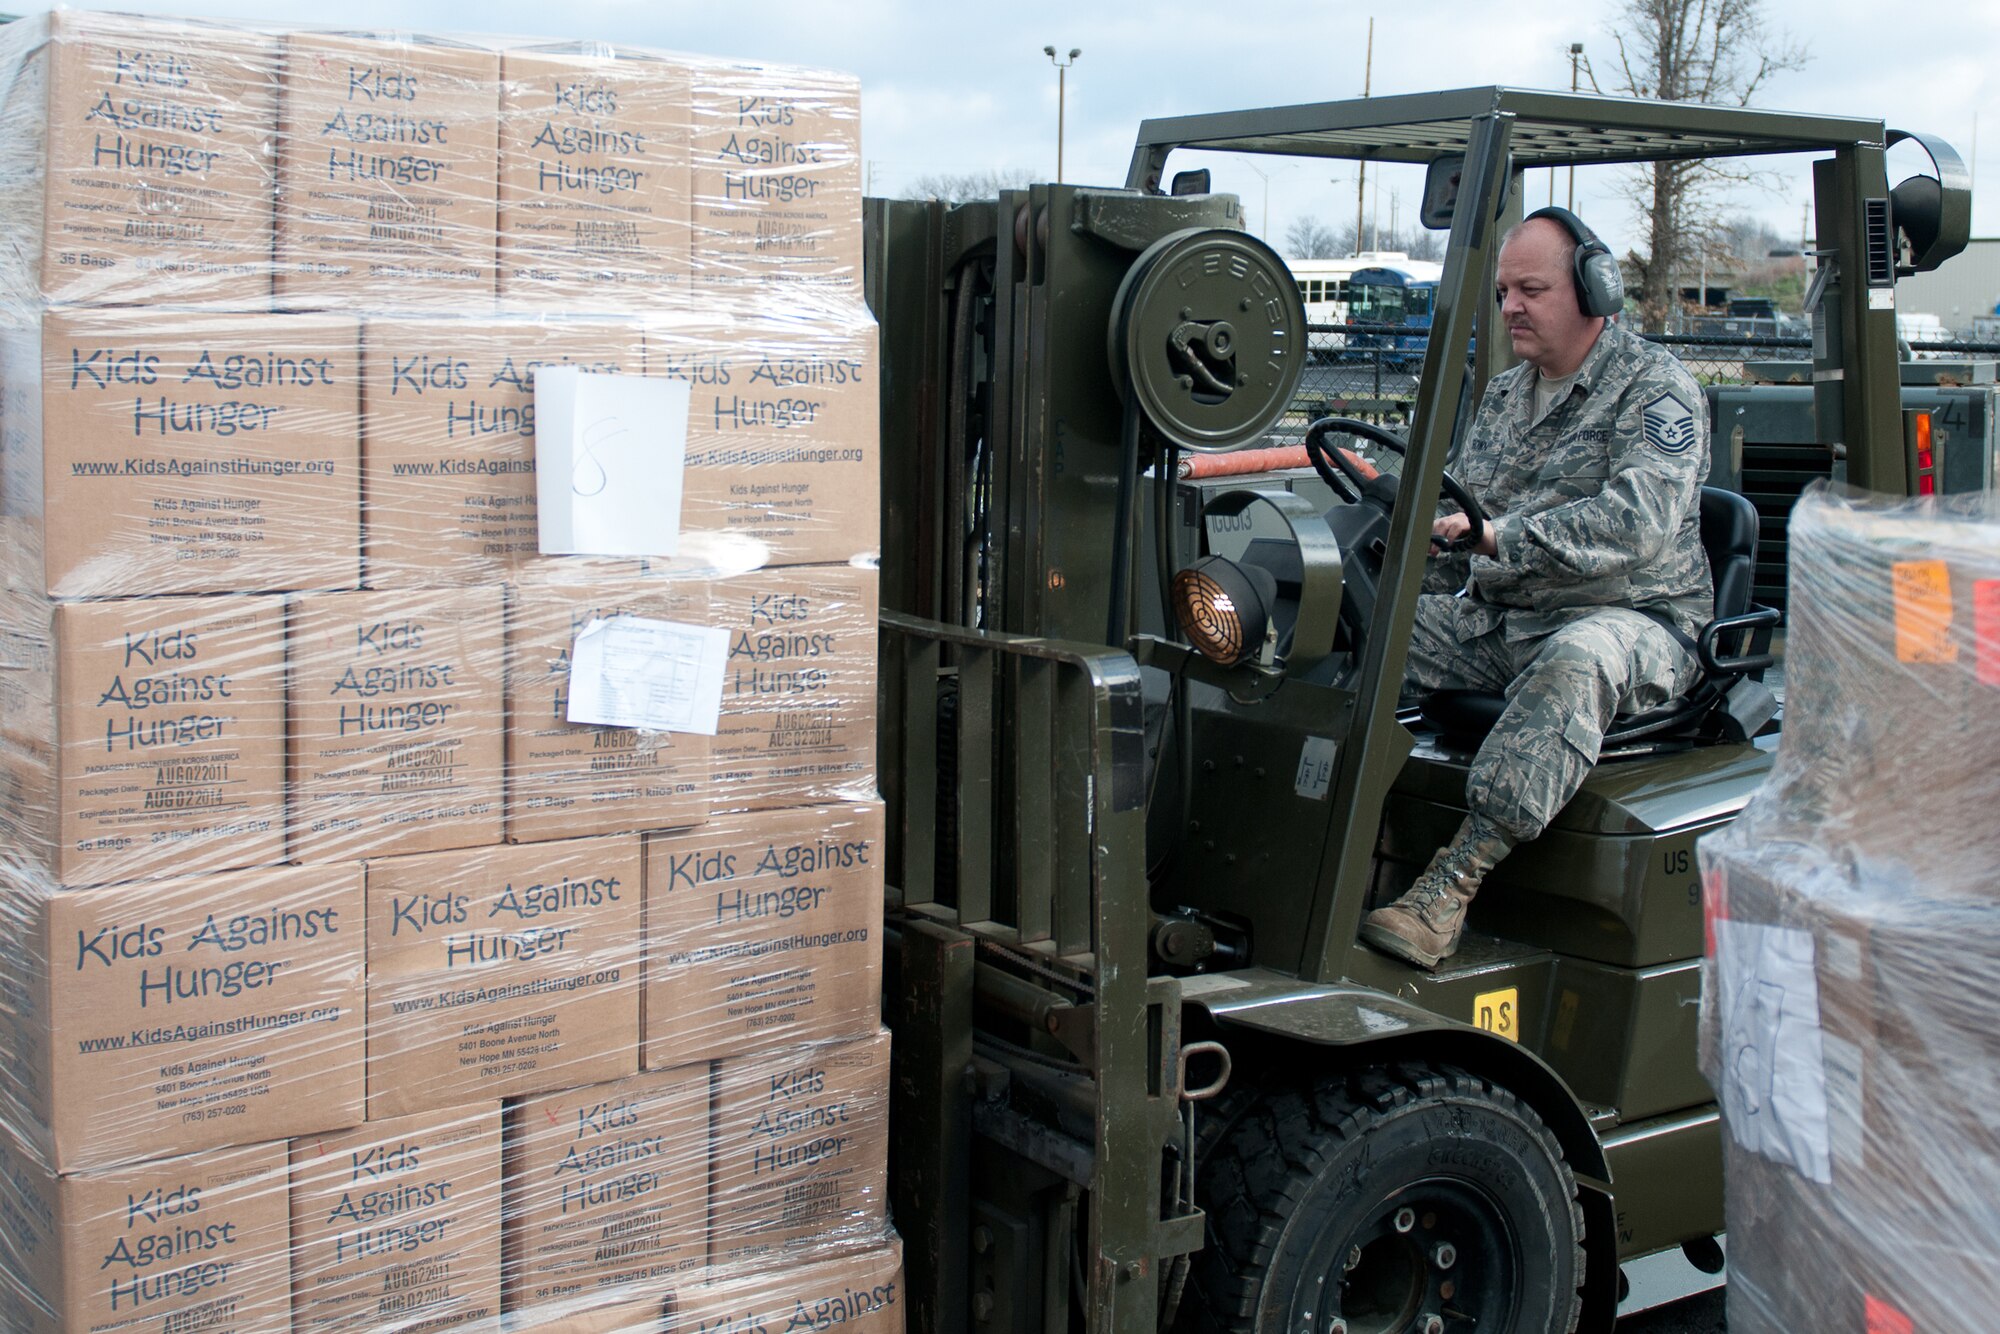 Master Sgt. Robert Brown, traffic manager for the 123rd Logistics Readiness Squadron, moves pallets of food destined for Haiti in preparation for loading them onto U.S. Air Force planes March 13, 2012. The Kentucky Air National Guard is helping Children???s Lifeline, a Kentucky-based non-profit organization, ship food and other supplies to Haiti through the Denton Program. The Denton Program is a U.S. government effort that allows private citizens and organizations to use space available on U.S. military cargo planes to transport humanitarian goods. (U.S. Air Force photo by Master Sgt. Phil Speck)